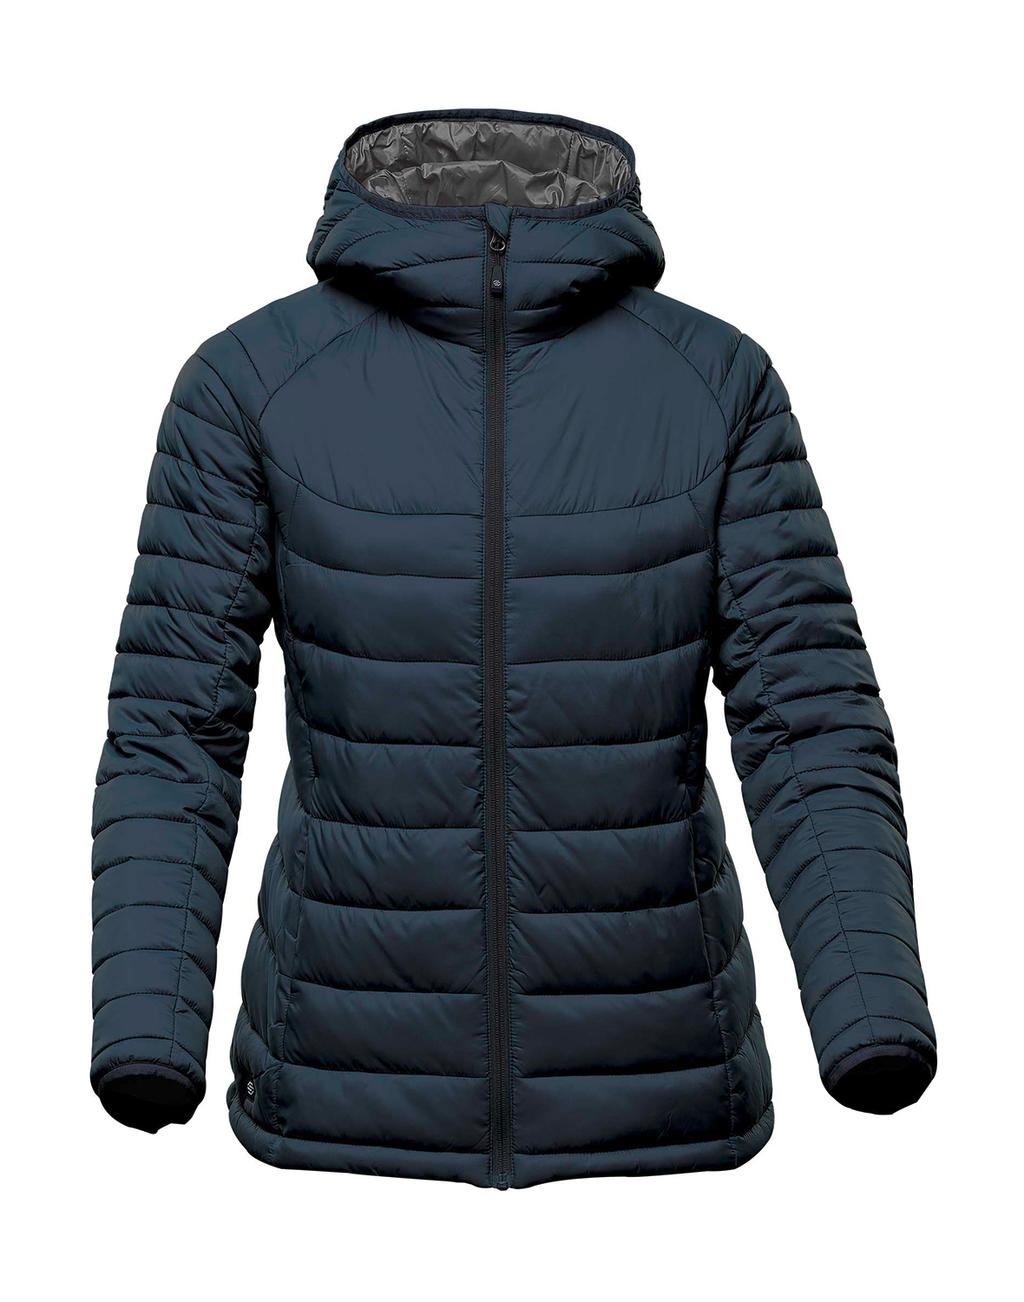  Womens Stavanger Thermal Jacket in Farbe Navy/Graphite